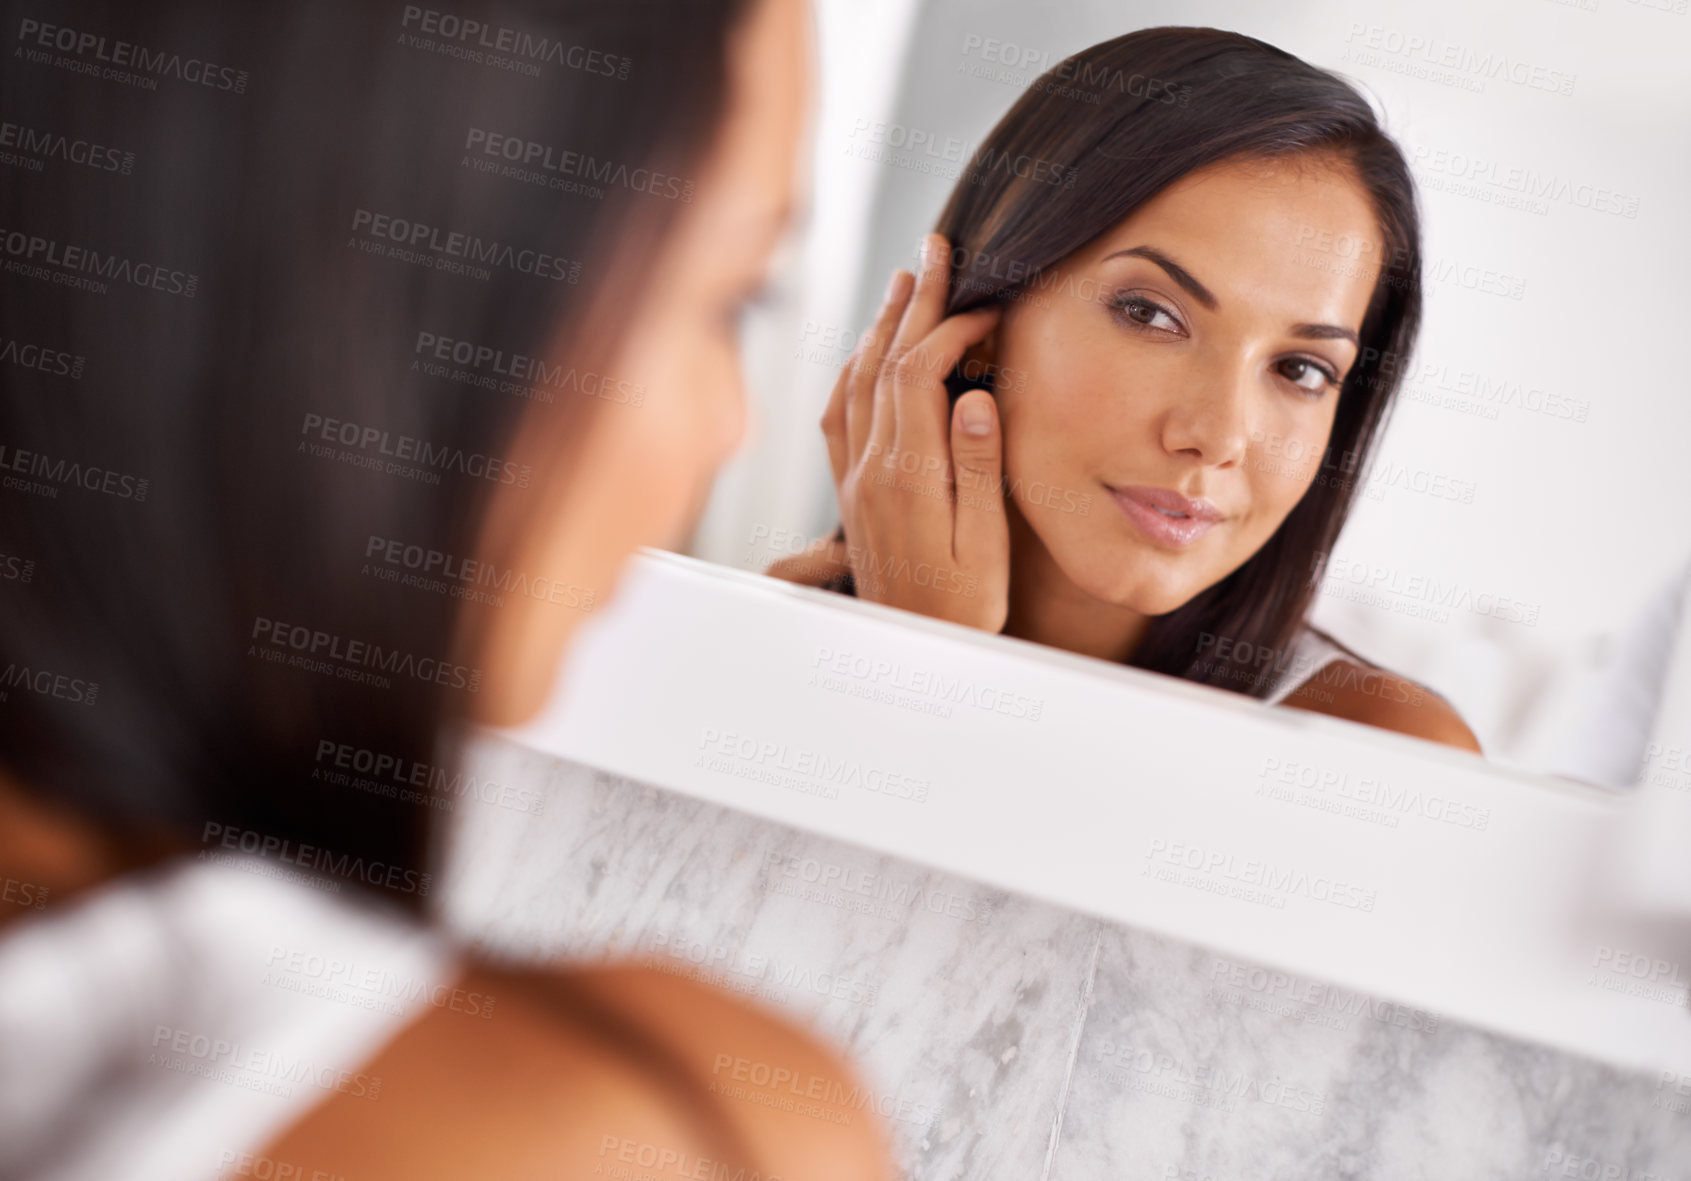 Buy stock photo Shot of a beautiful young woman looking at her face in the mirror